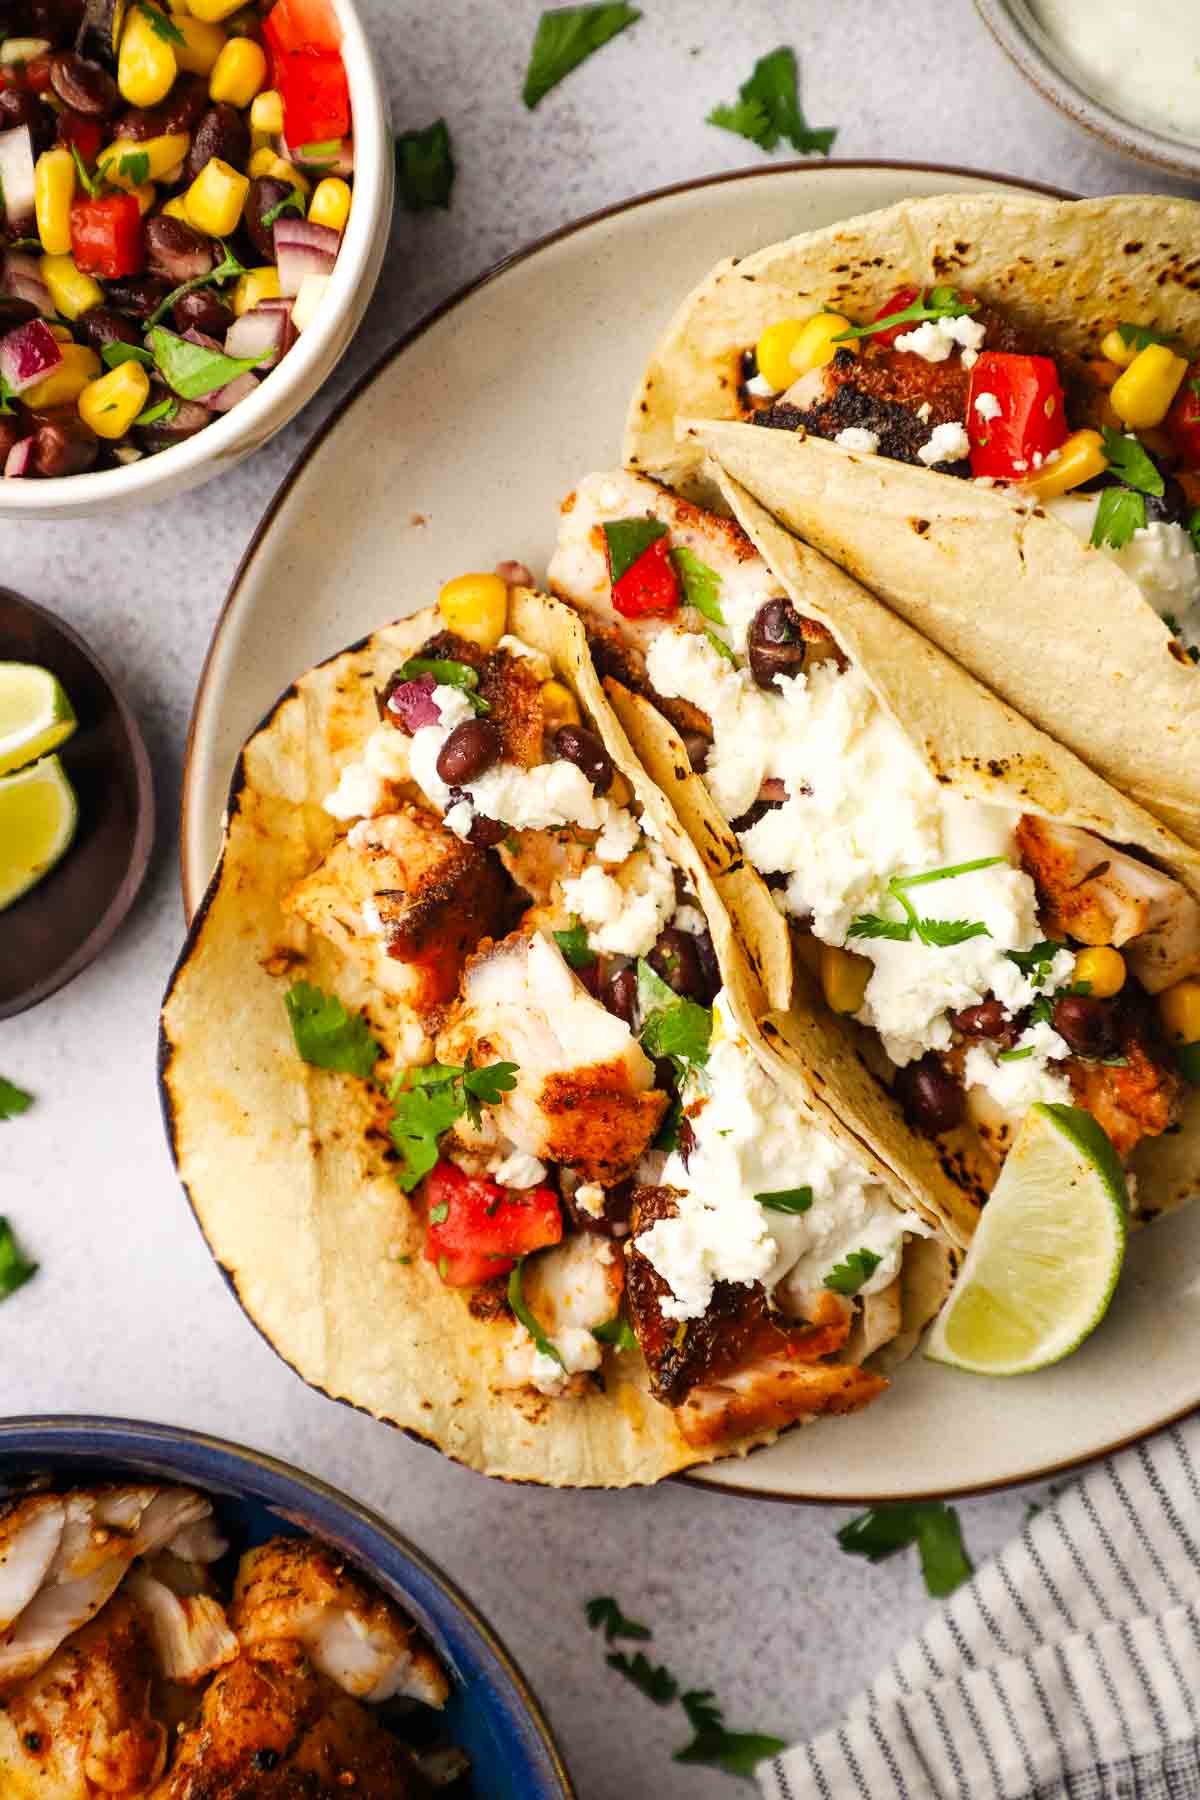 A plate of blackened fish tacos garnished with corn and black bean salsa, crema, queso fresco and cilantro.